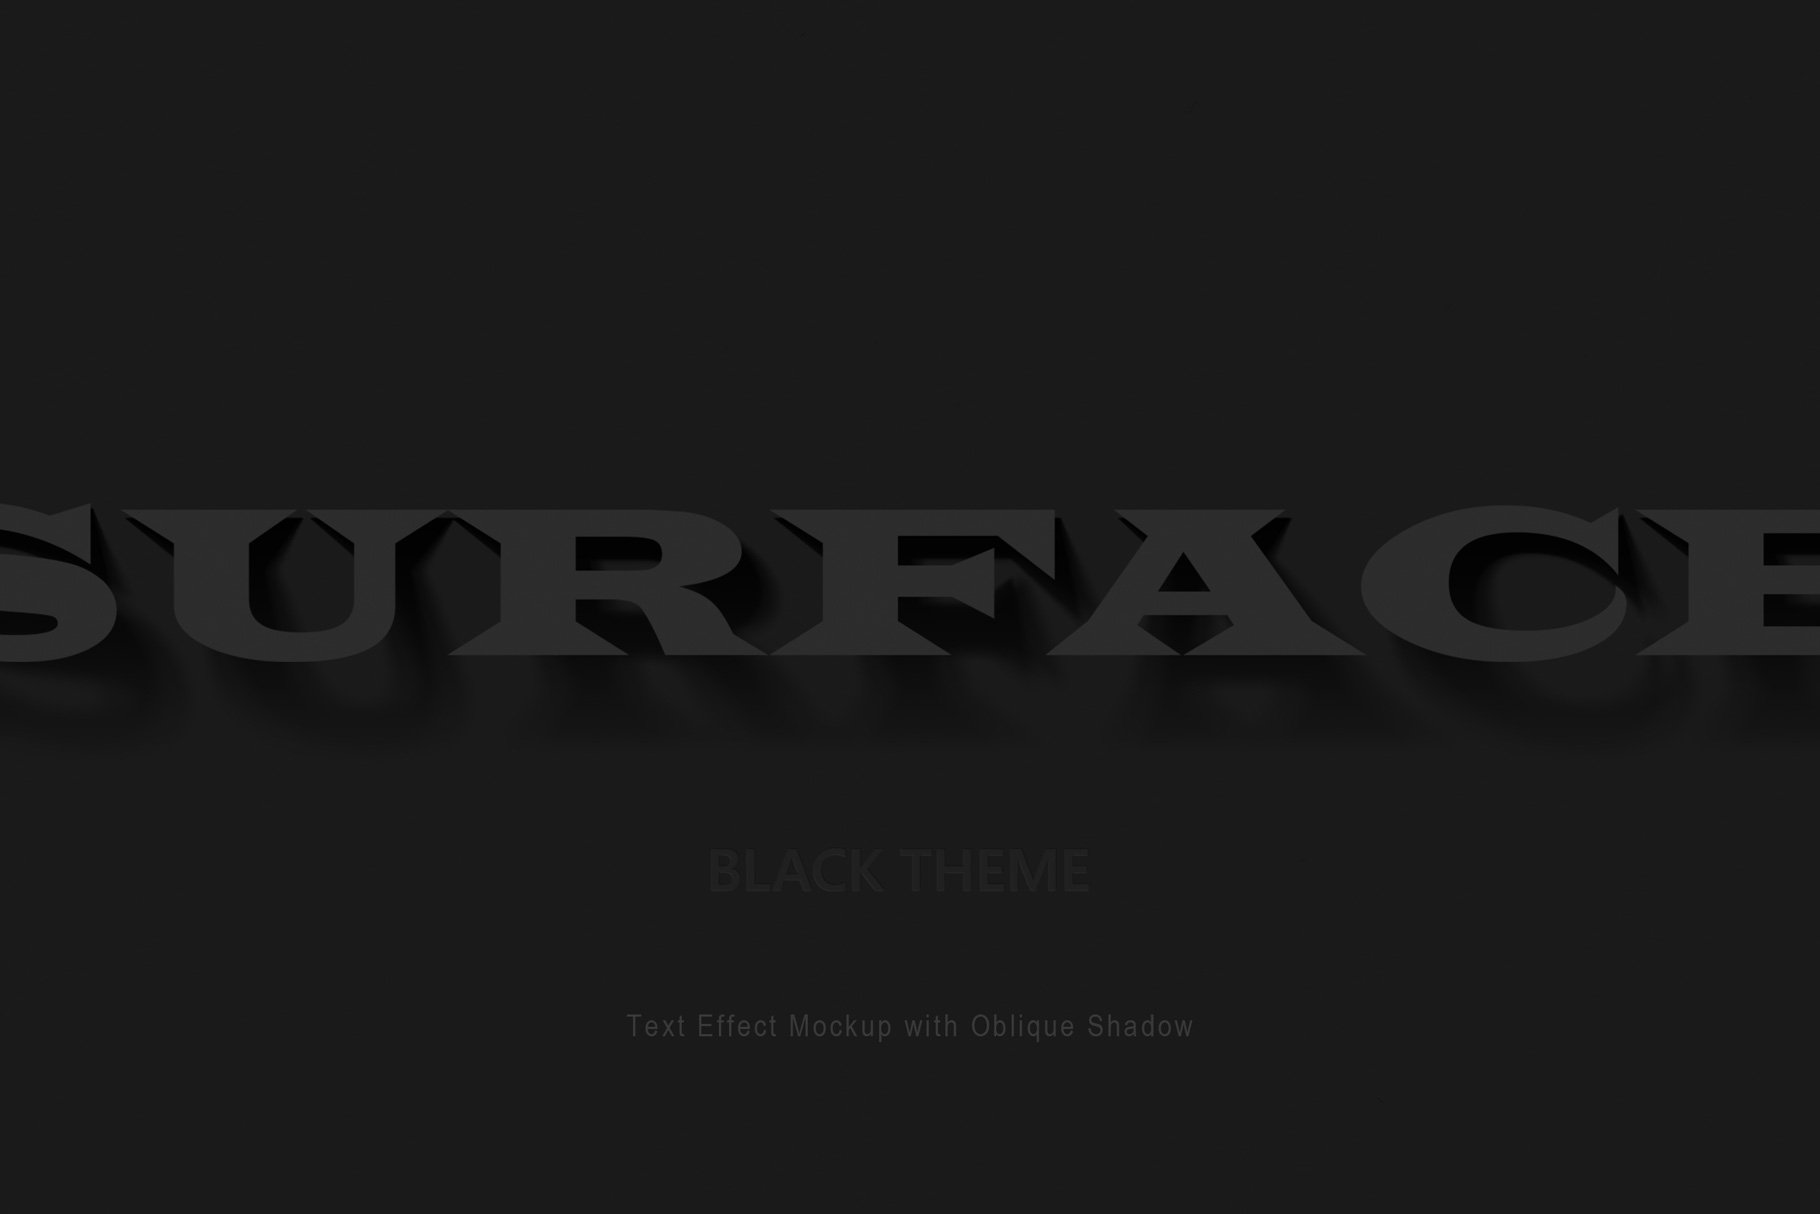 Text Effect with Oblique Shadowpreview image.